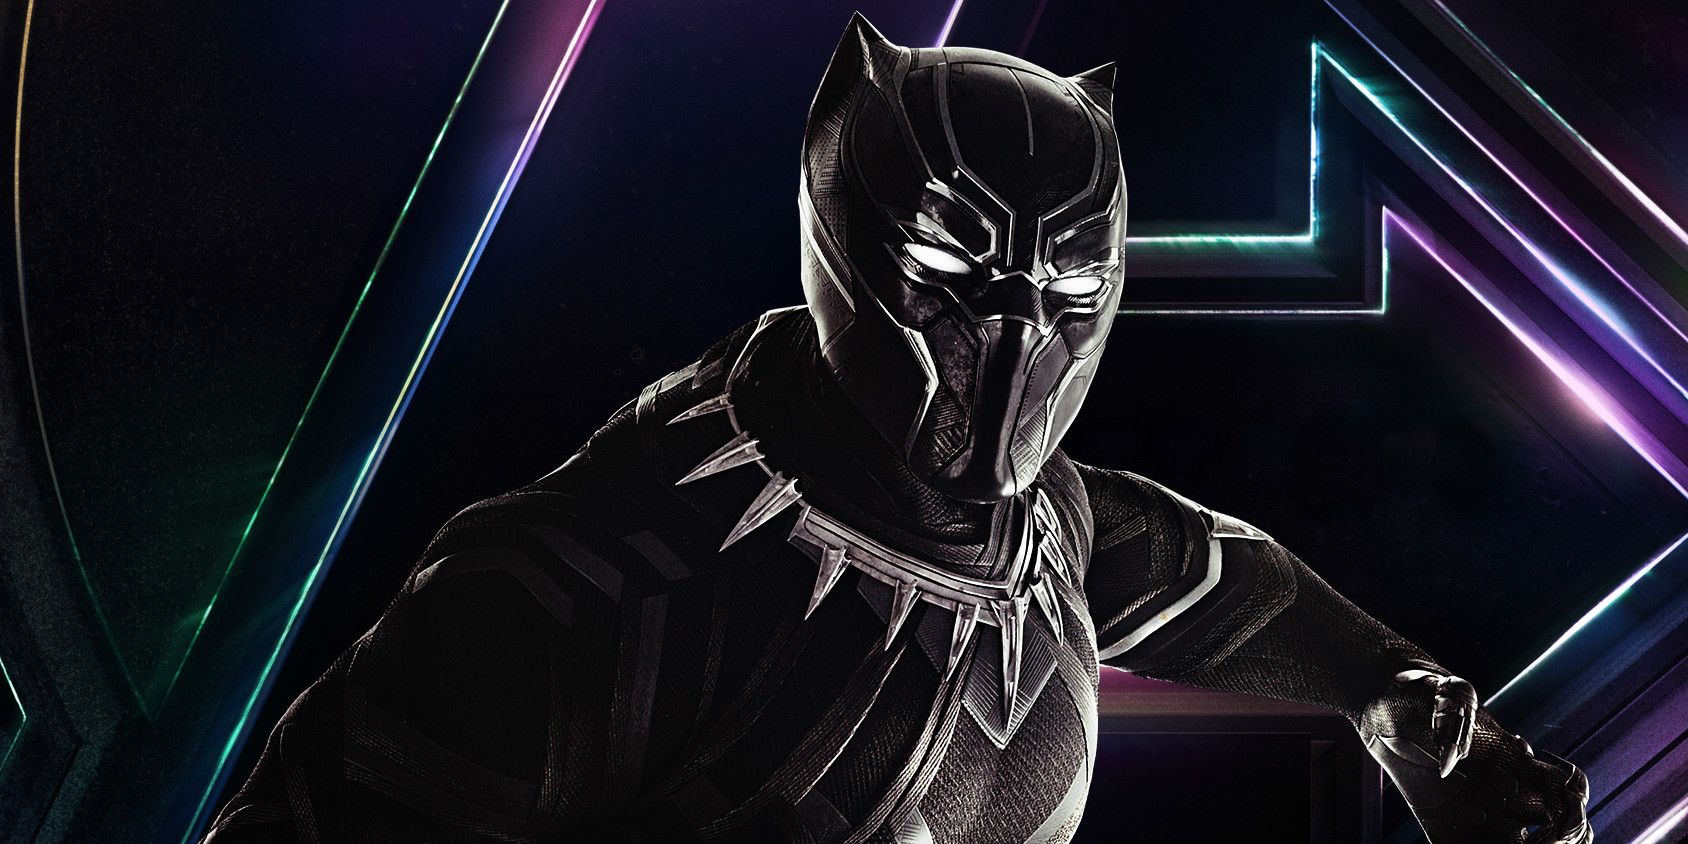 Is Black Panther's Post-Credits Scene Worth Waiting For?